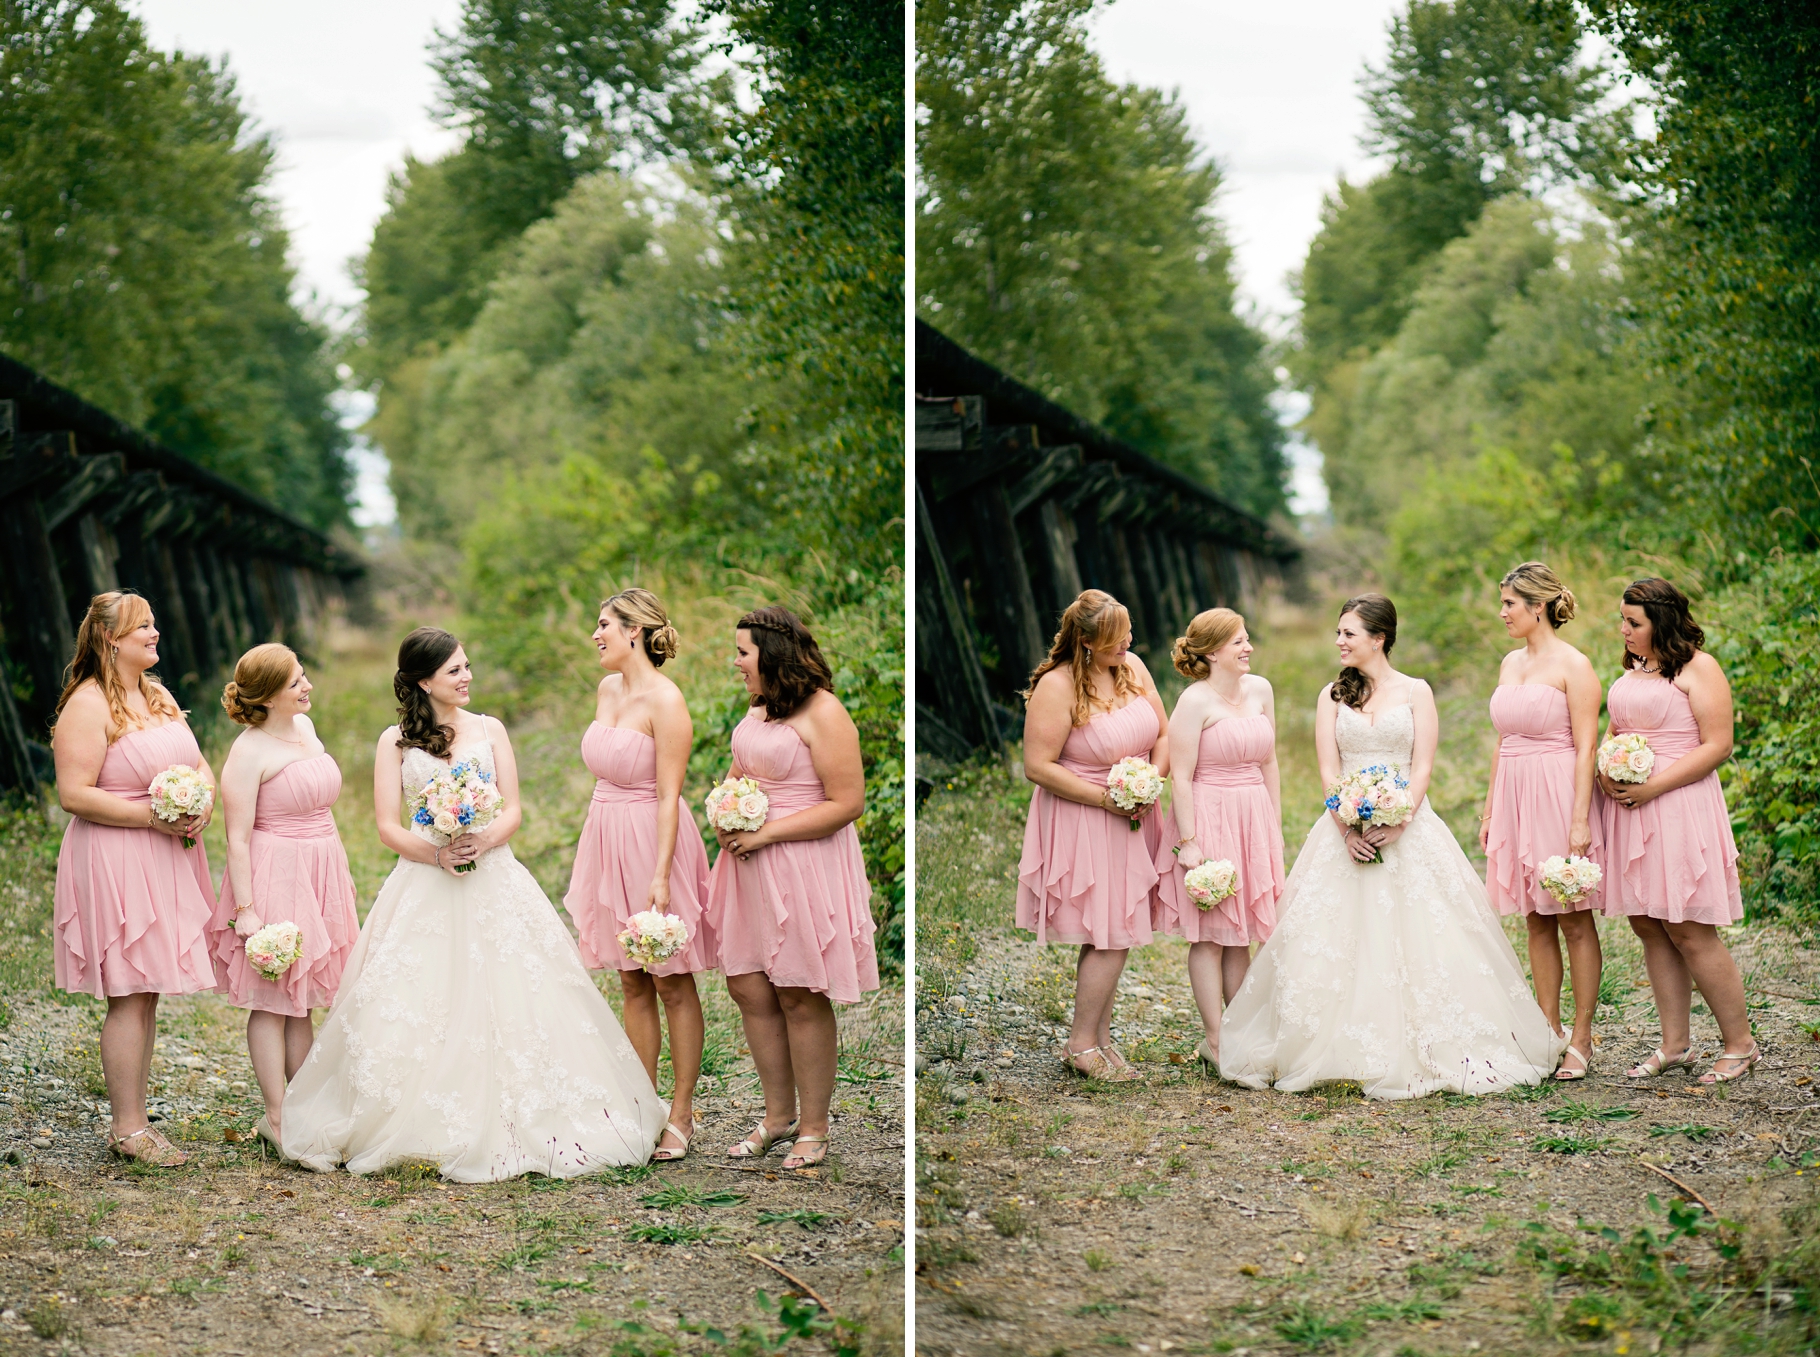 23-Bridesmaids-Bridal-Party-Portraits-Pink-Gowns-Dresses-Gold-Hidden-Meadows-Snohomish-Wedding-Photographer-Northwest-Seattle-Photography-by-Betty-Elaine